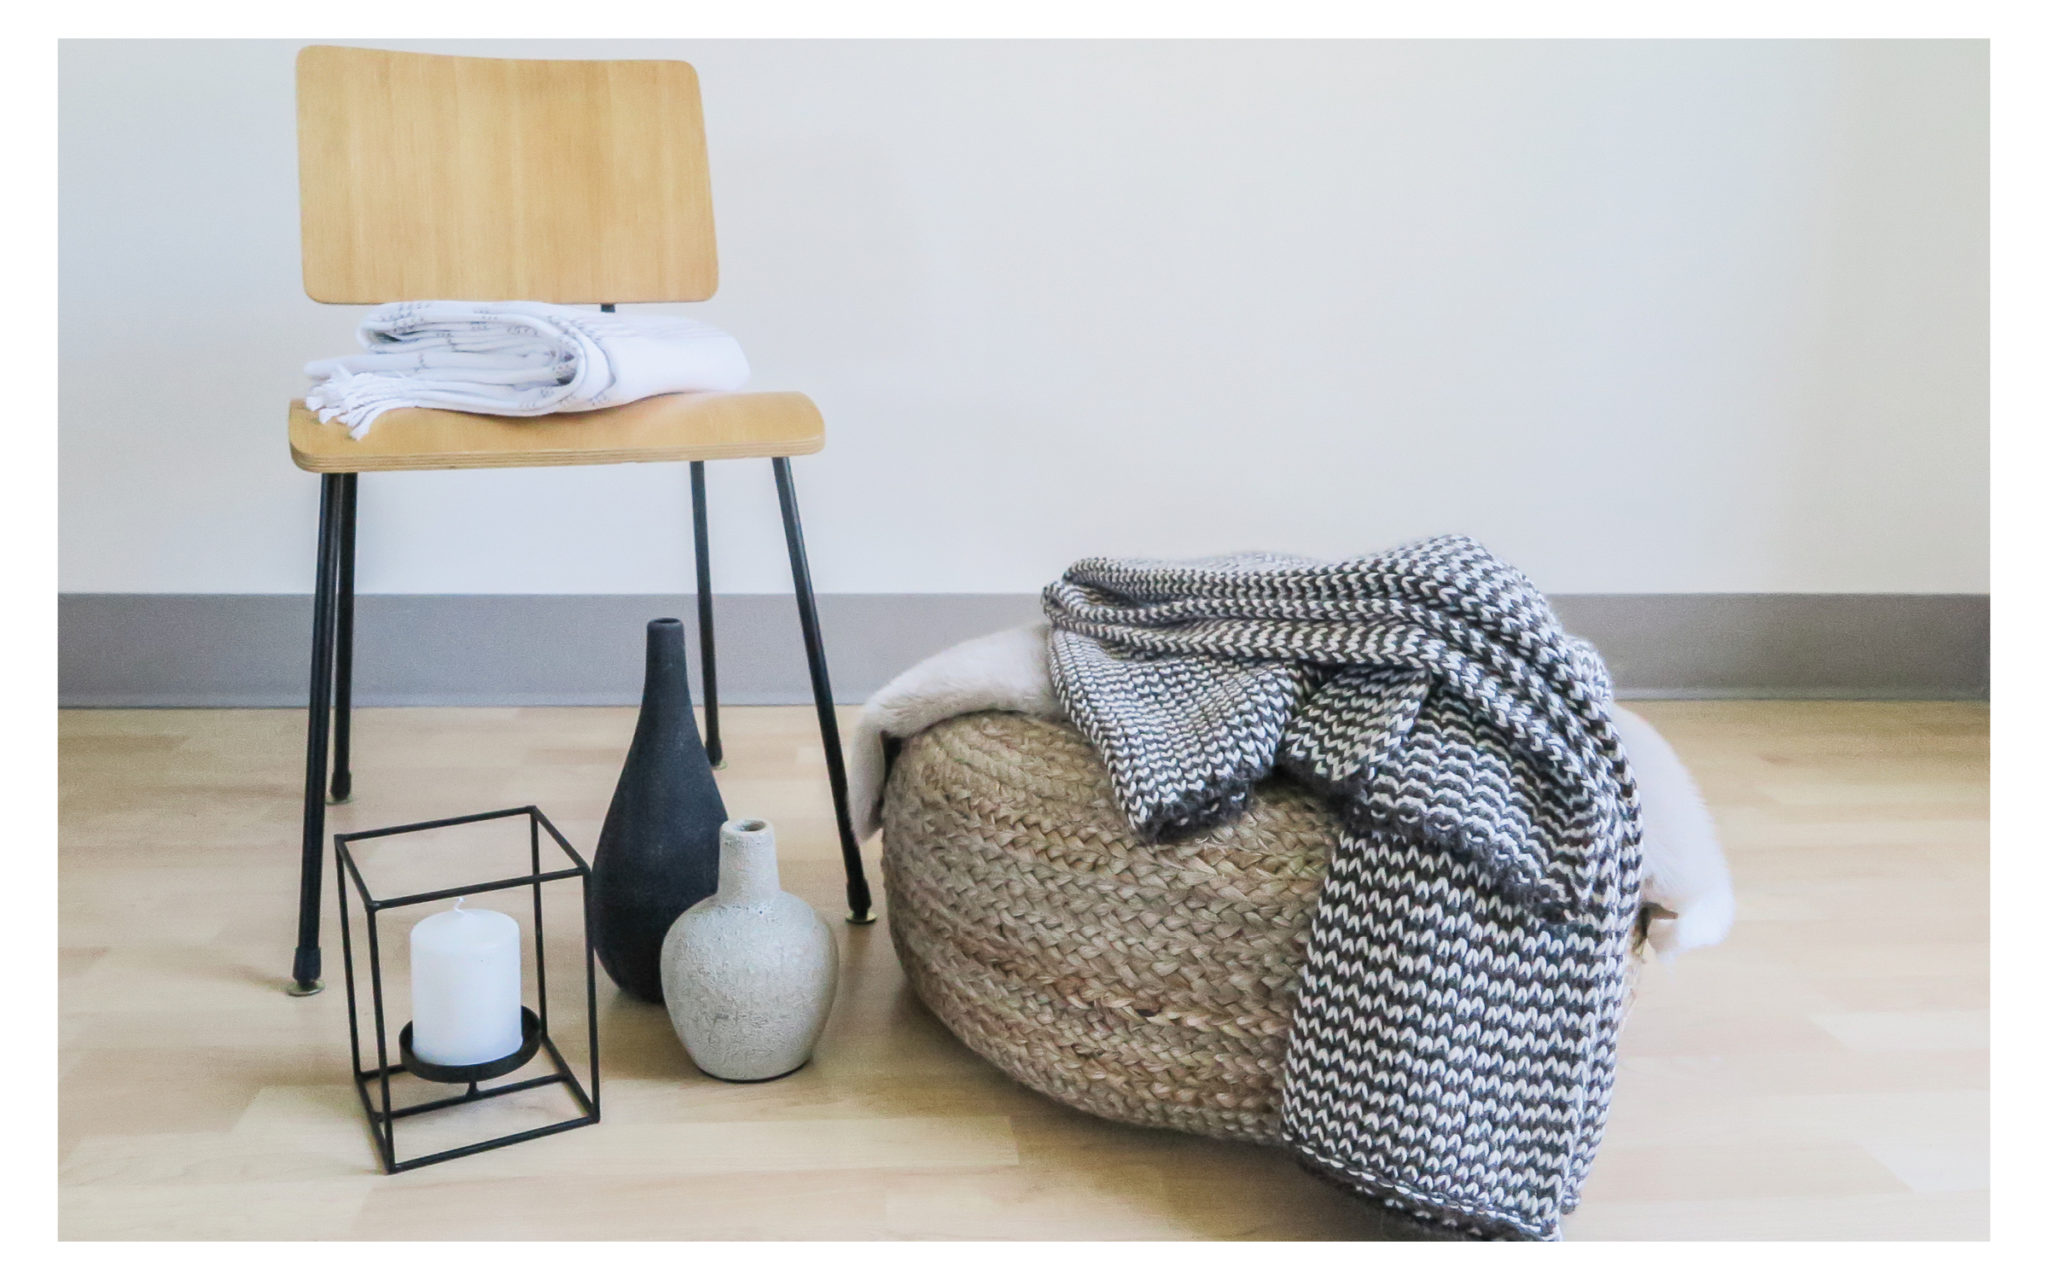 hygge details with rattan pouff and layered throw blankets